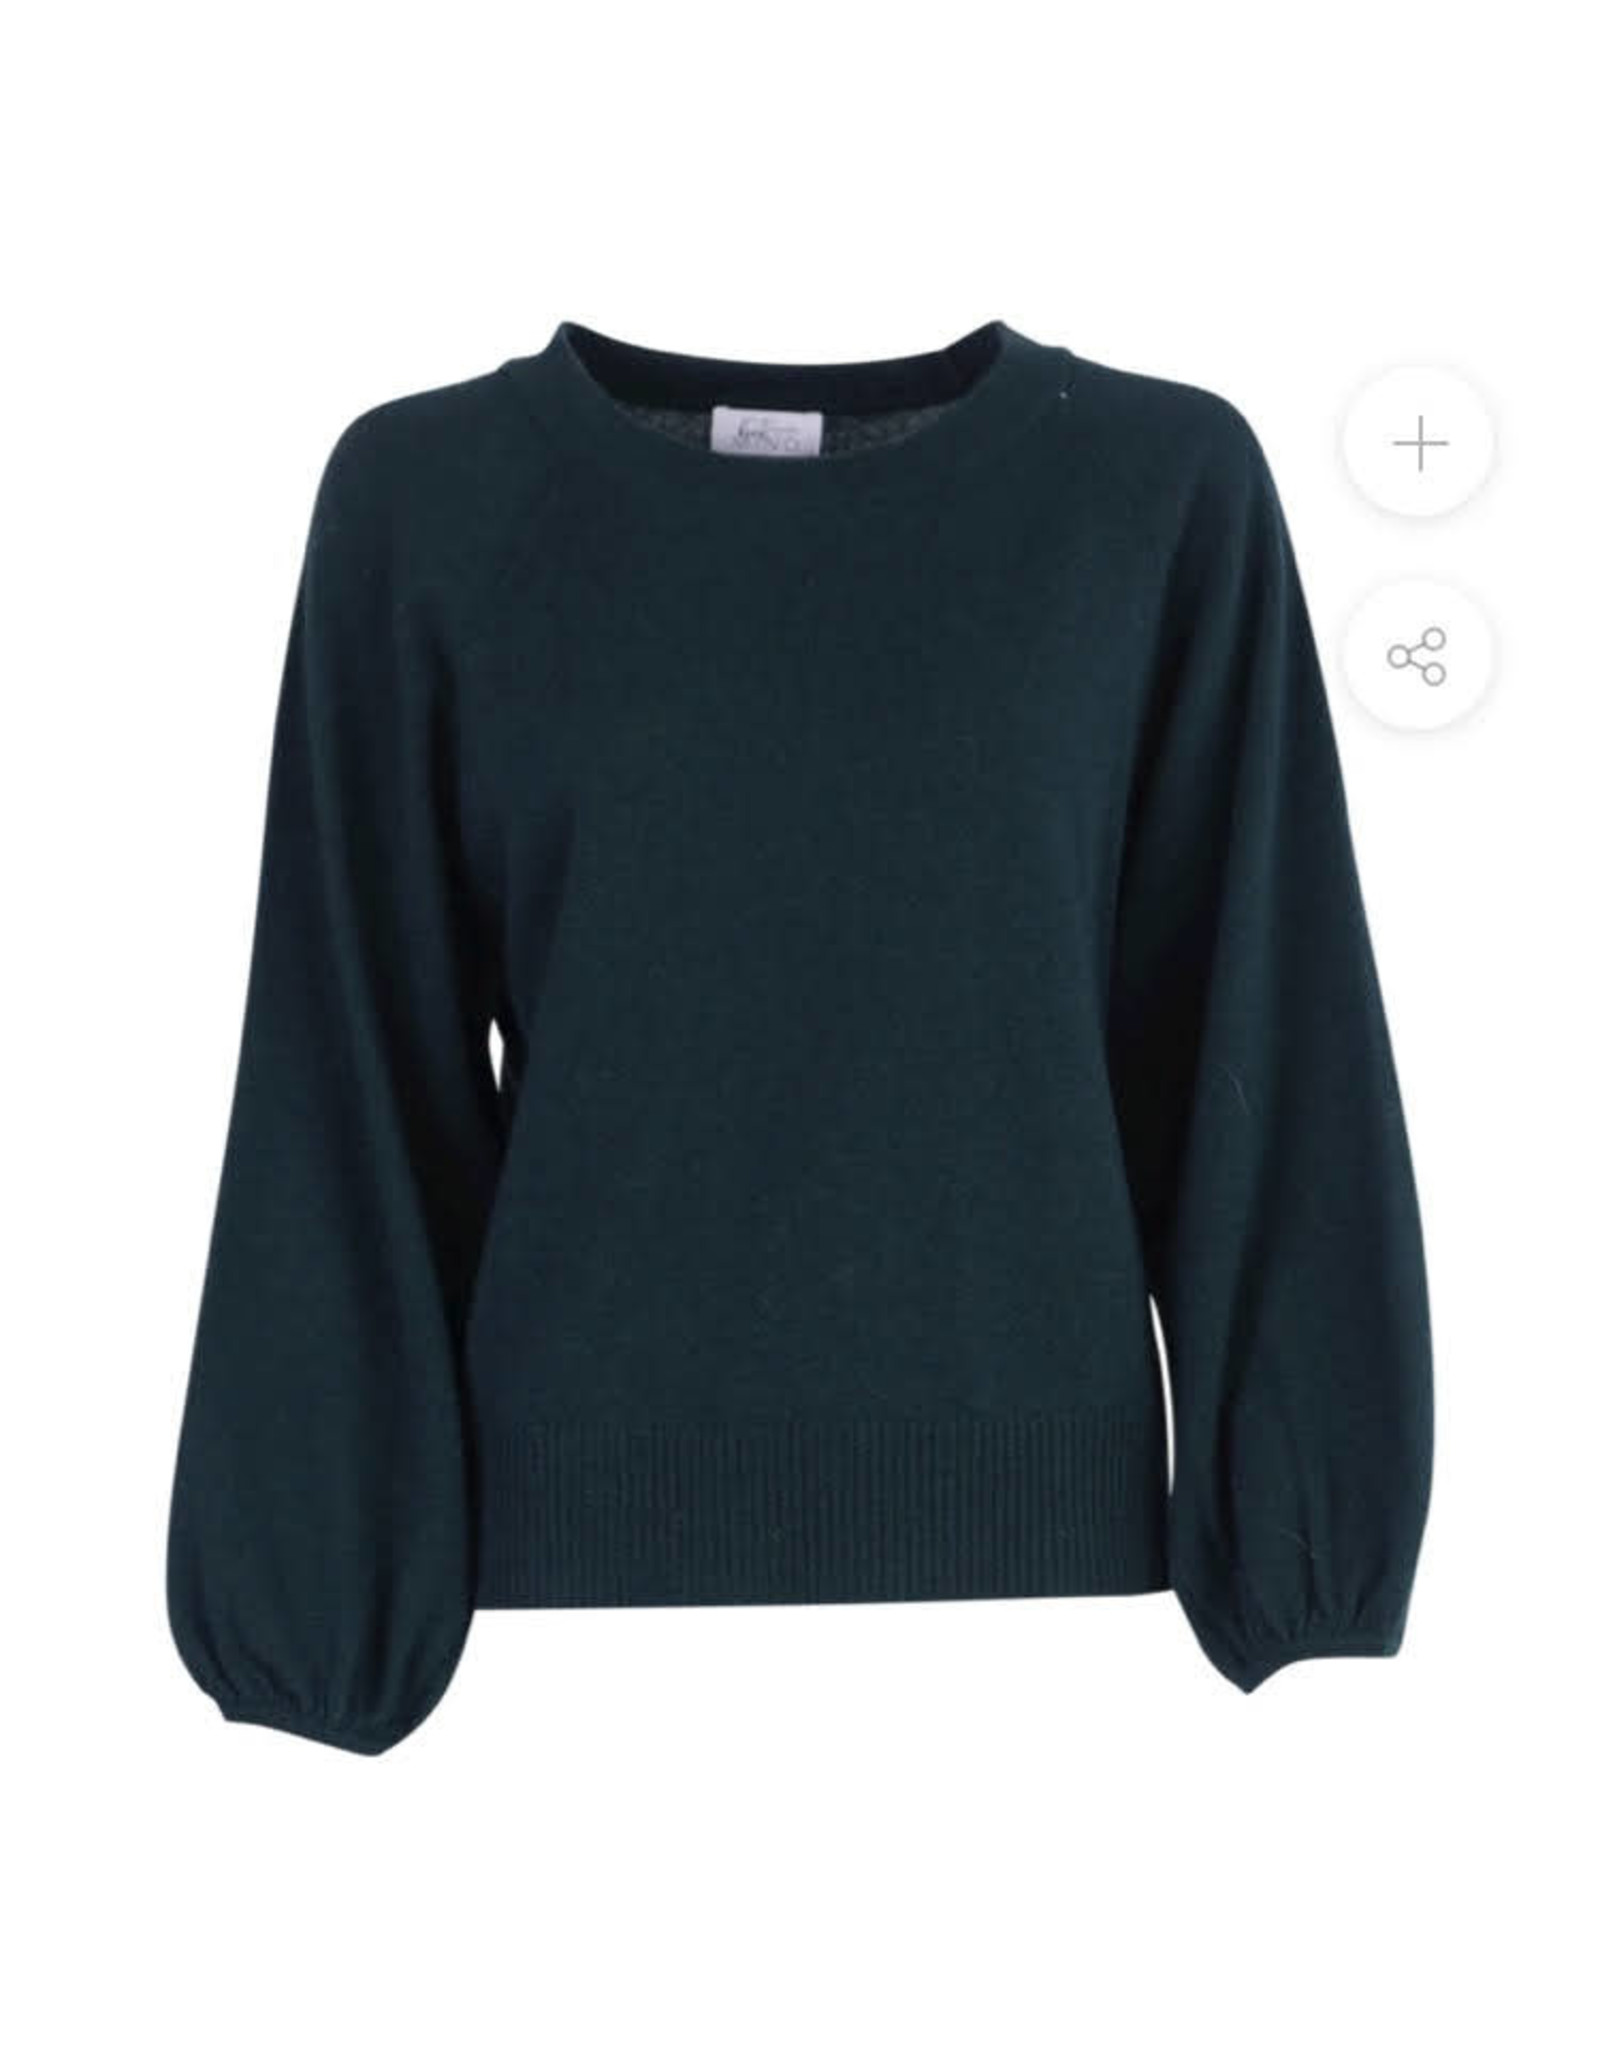 Heartmind KOOS KNIT PULL CASHMERE GREEN